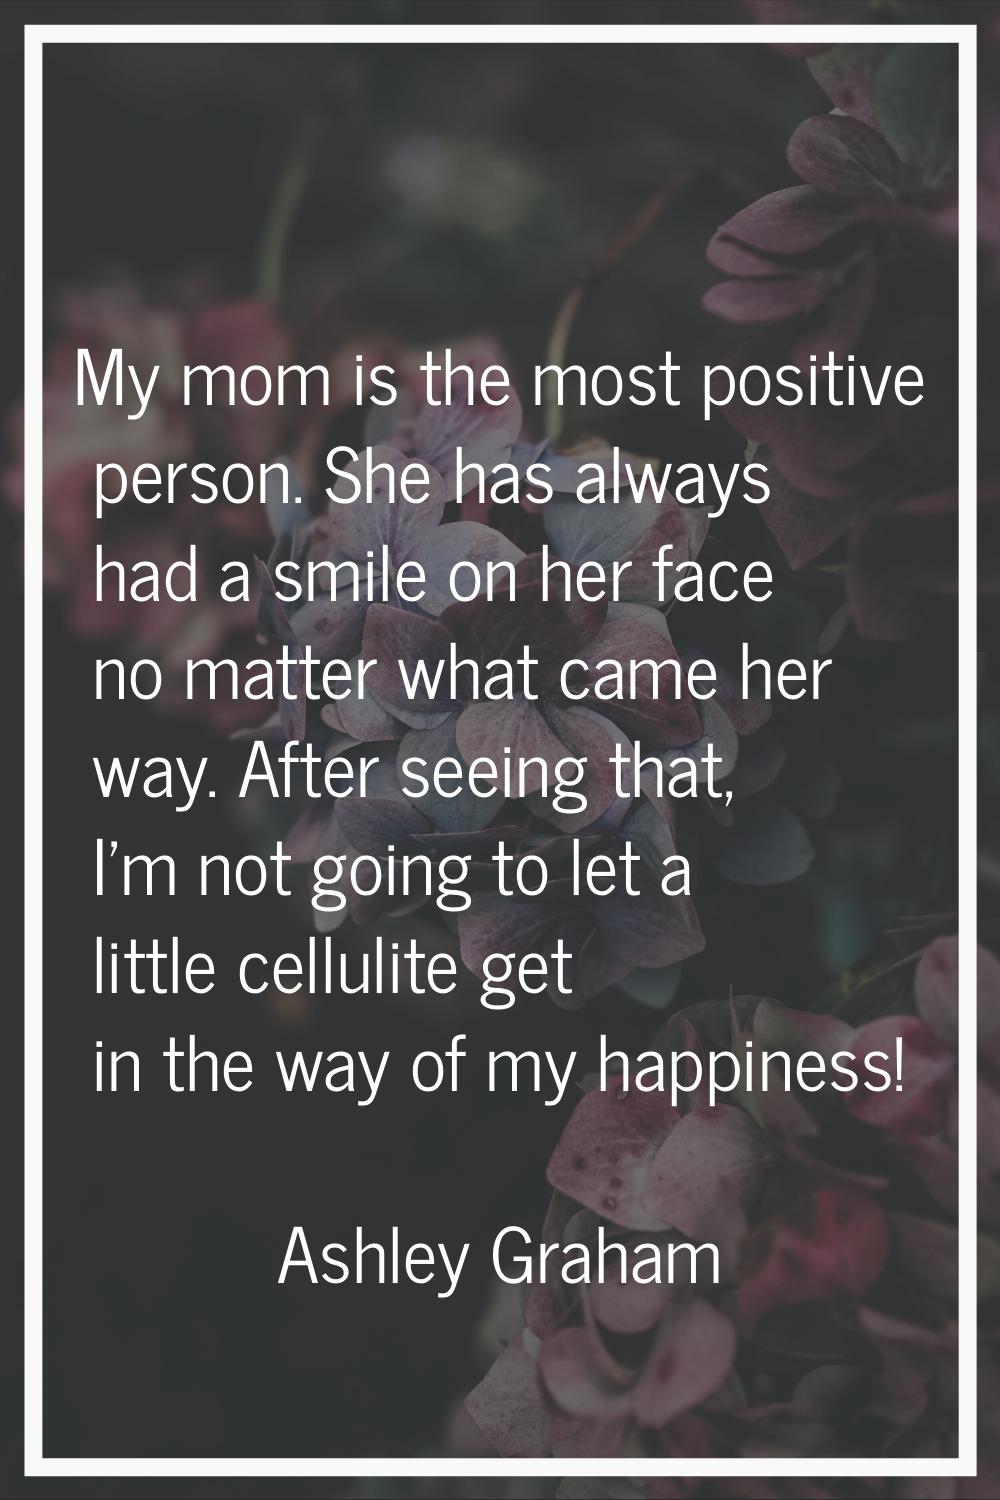 My mom is the most positive person. She has always had a smile on her face no matter what came her 